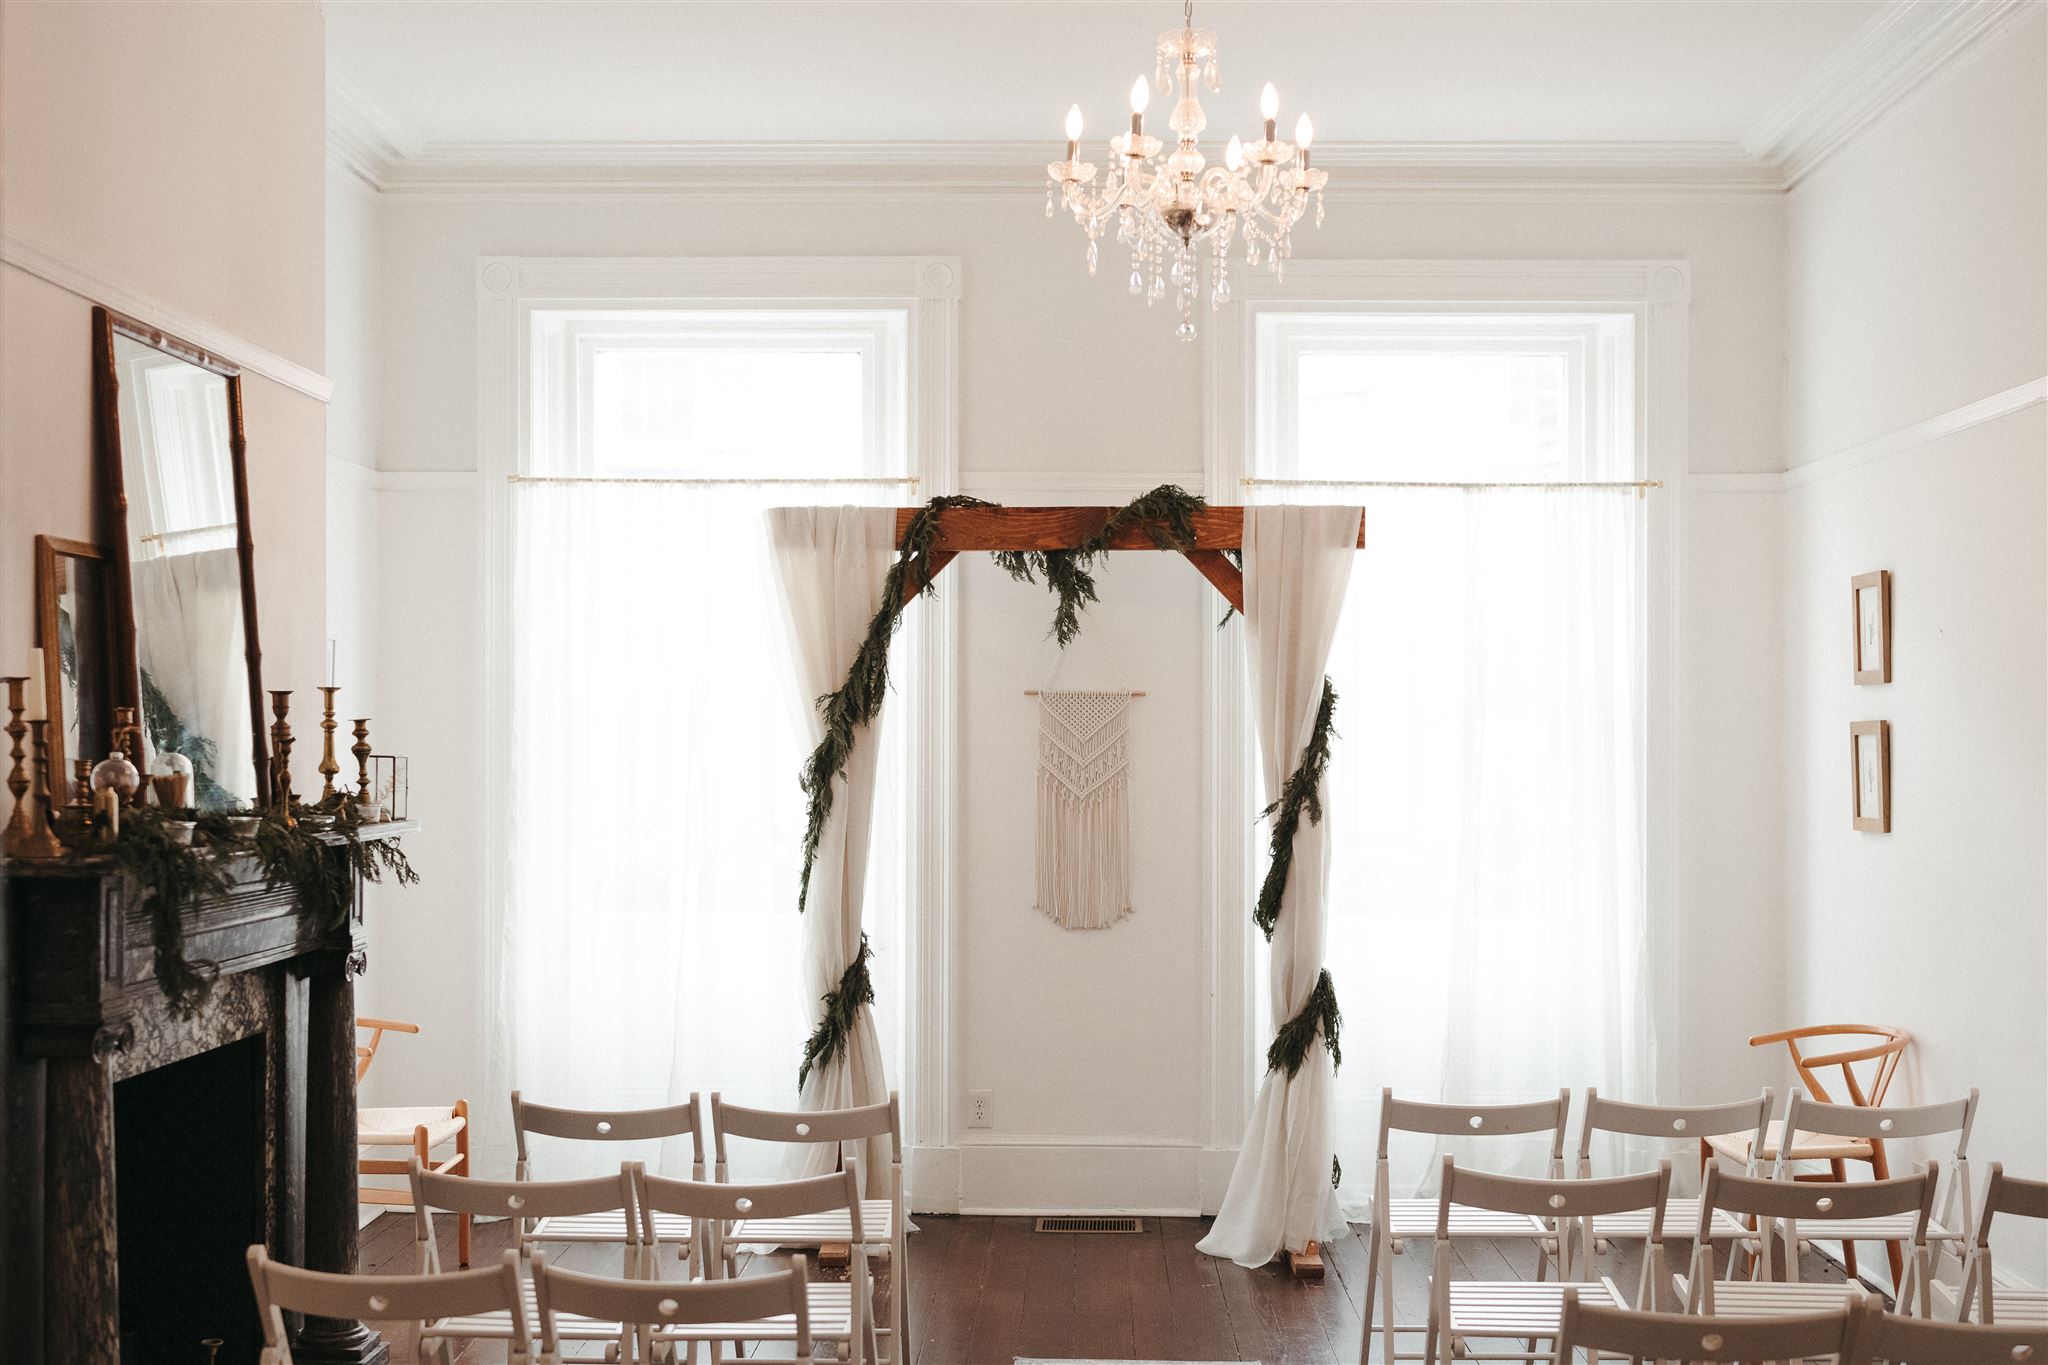 Shot for Jess Flynn - How to Elope in Philadelphia 2022: Minimalist and aesthetic wedding ceremony setup at Vaux Studio